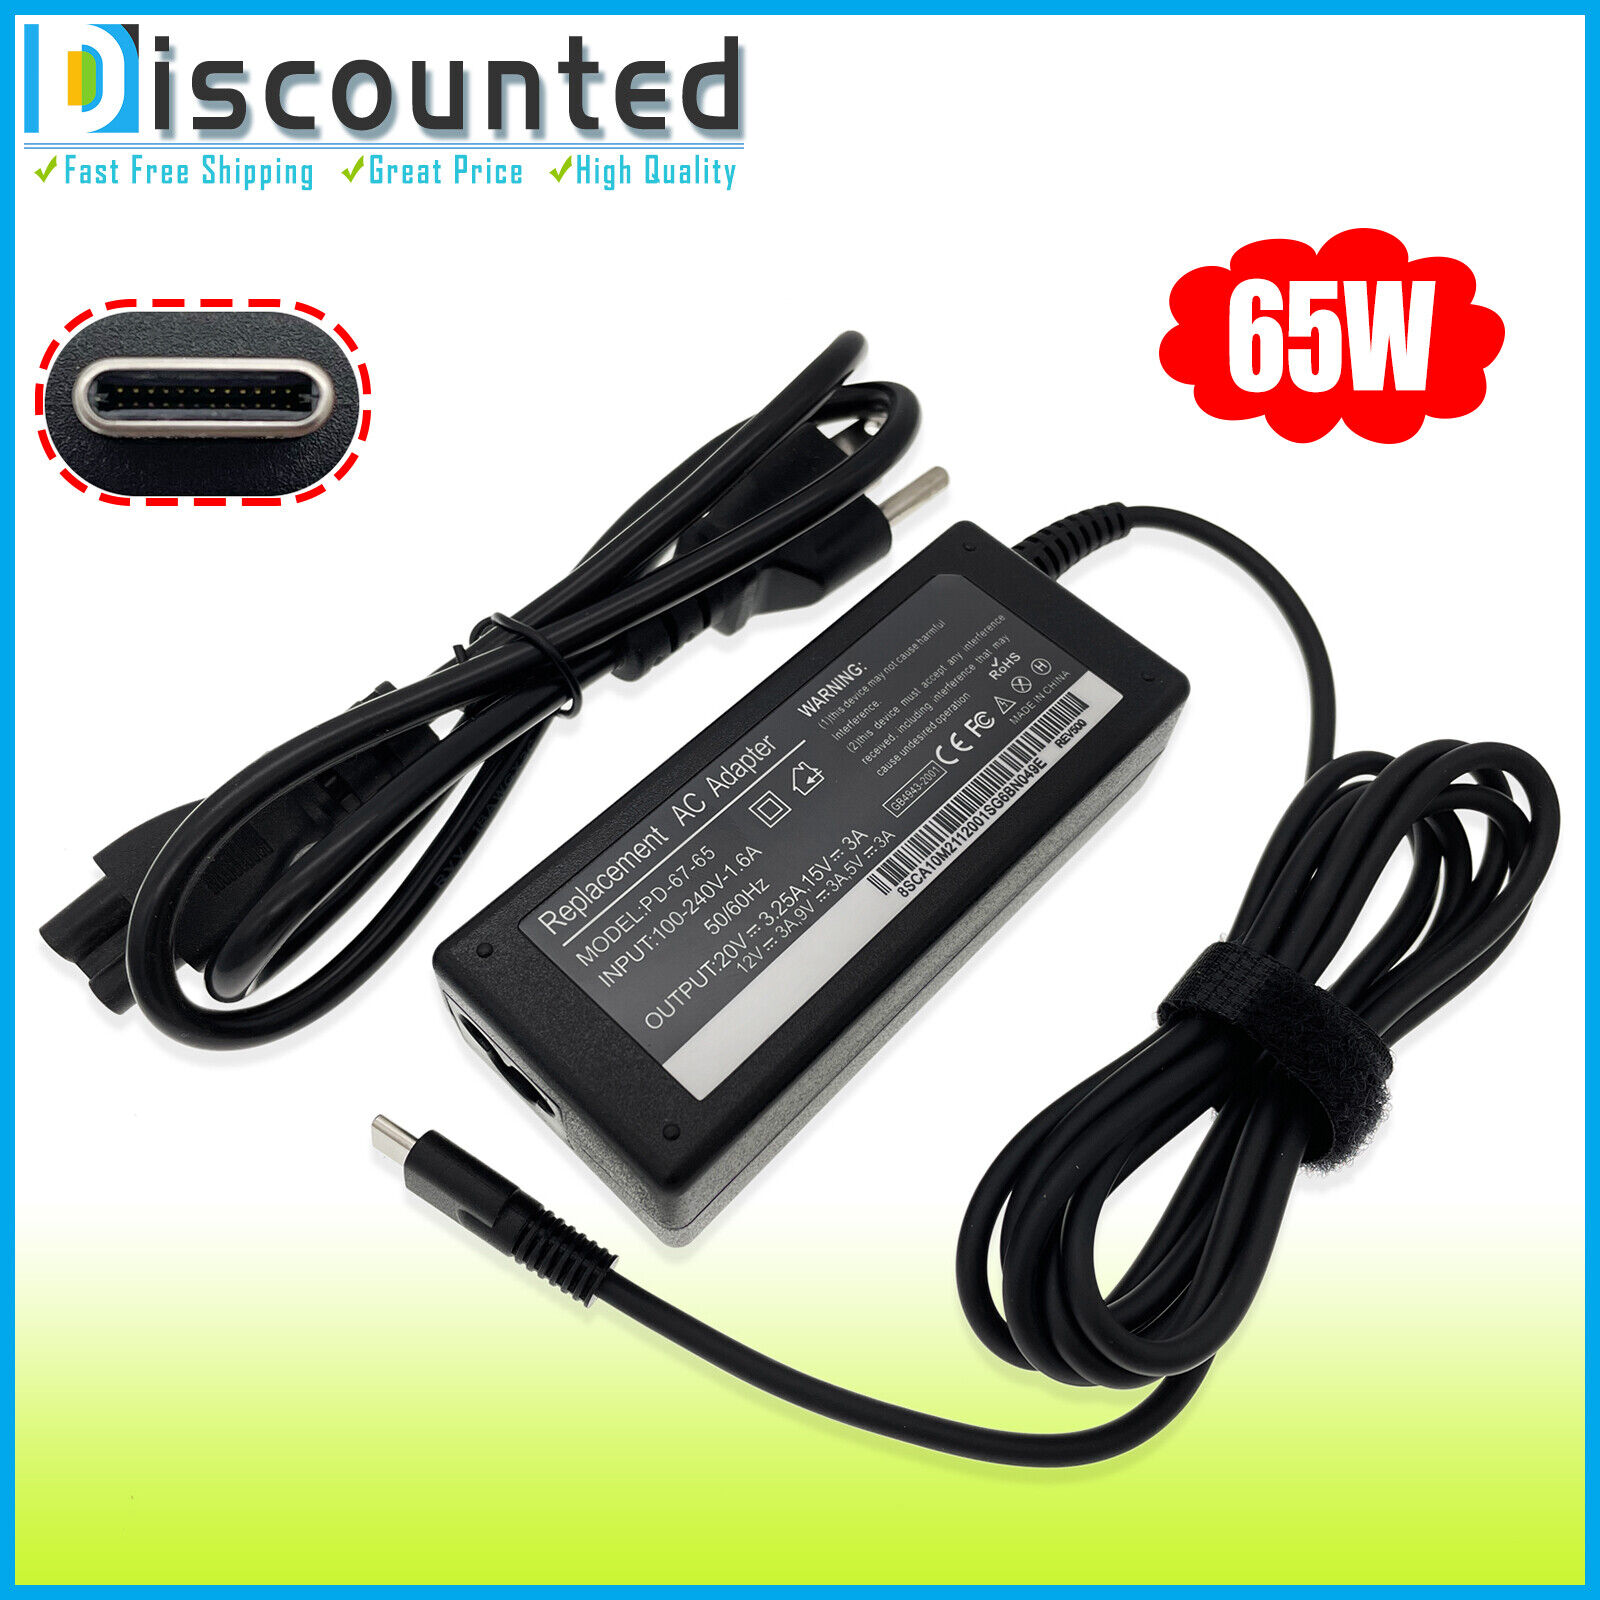 New 65W USB Type-C AC Adapter Charger for LG gram 16Z90Q Series ADT-65DSU-D03-2